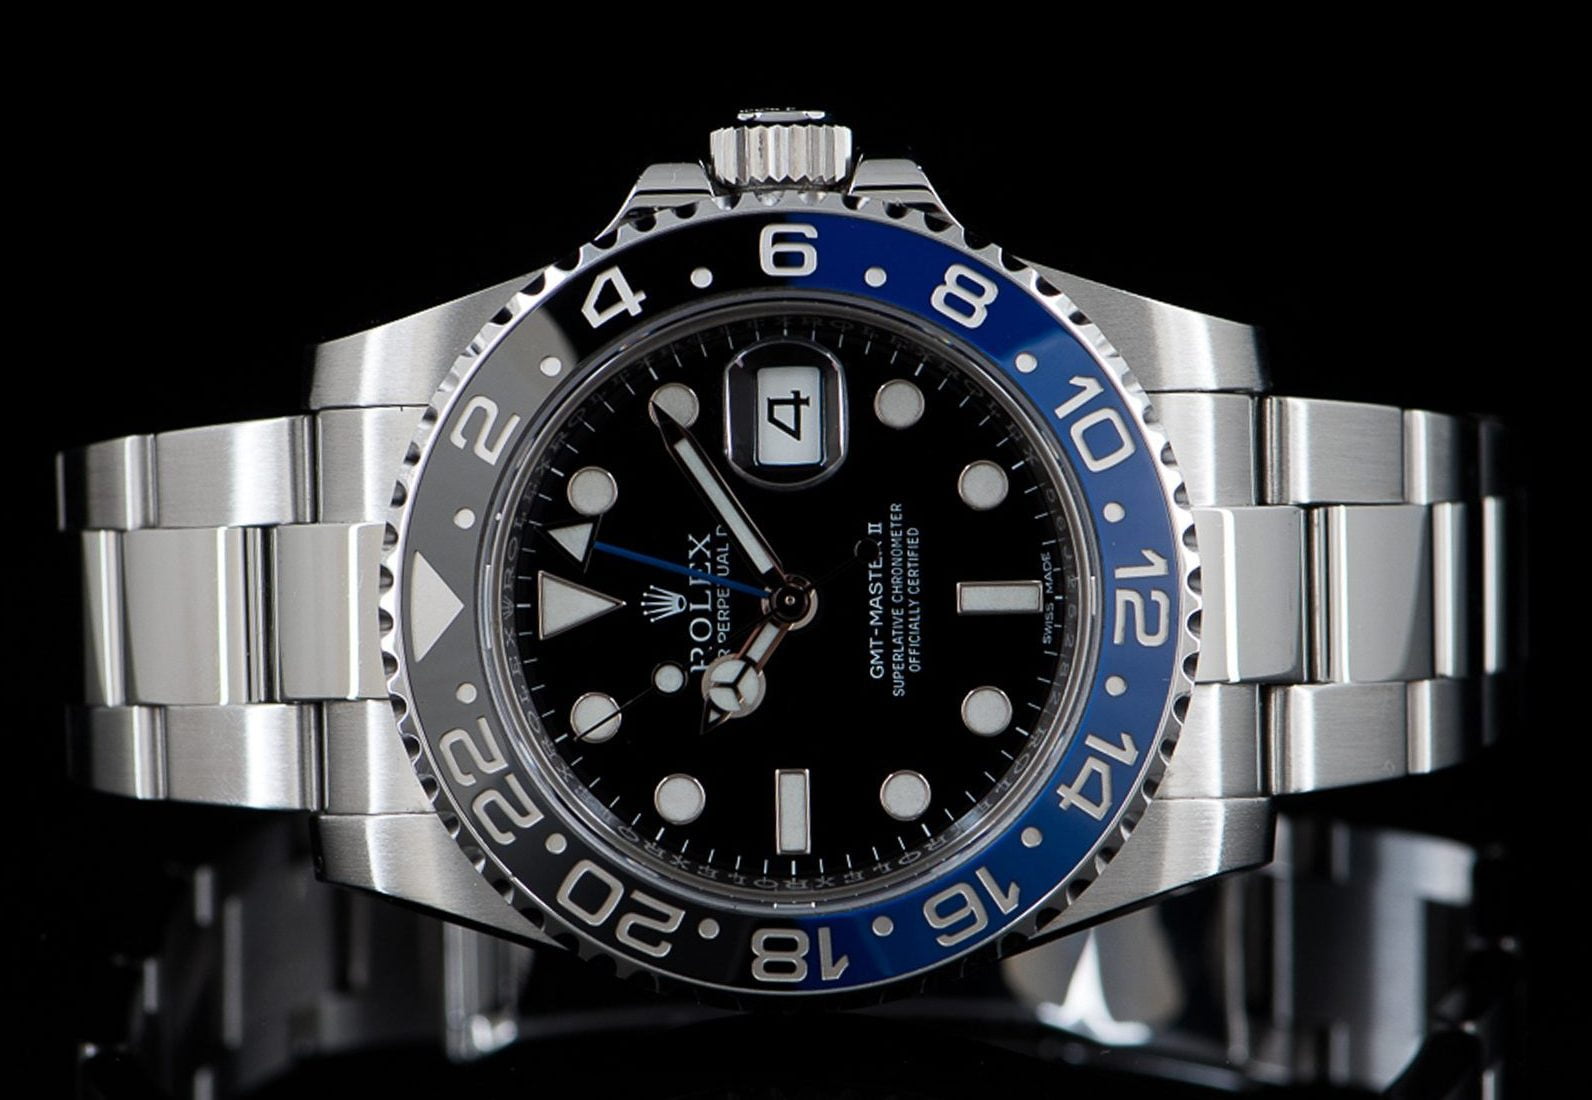 Is it the best time to sell your ROLEX?